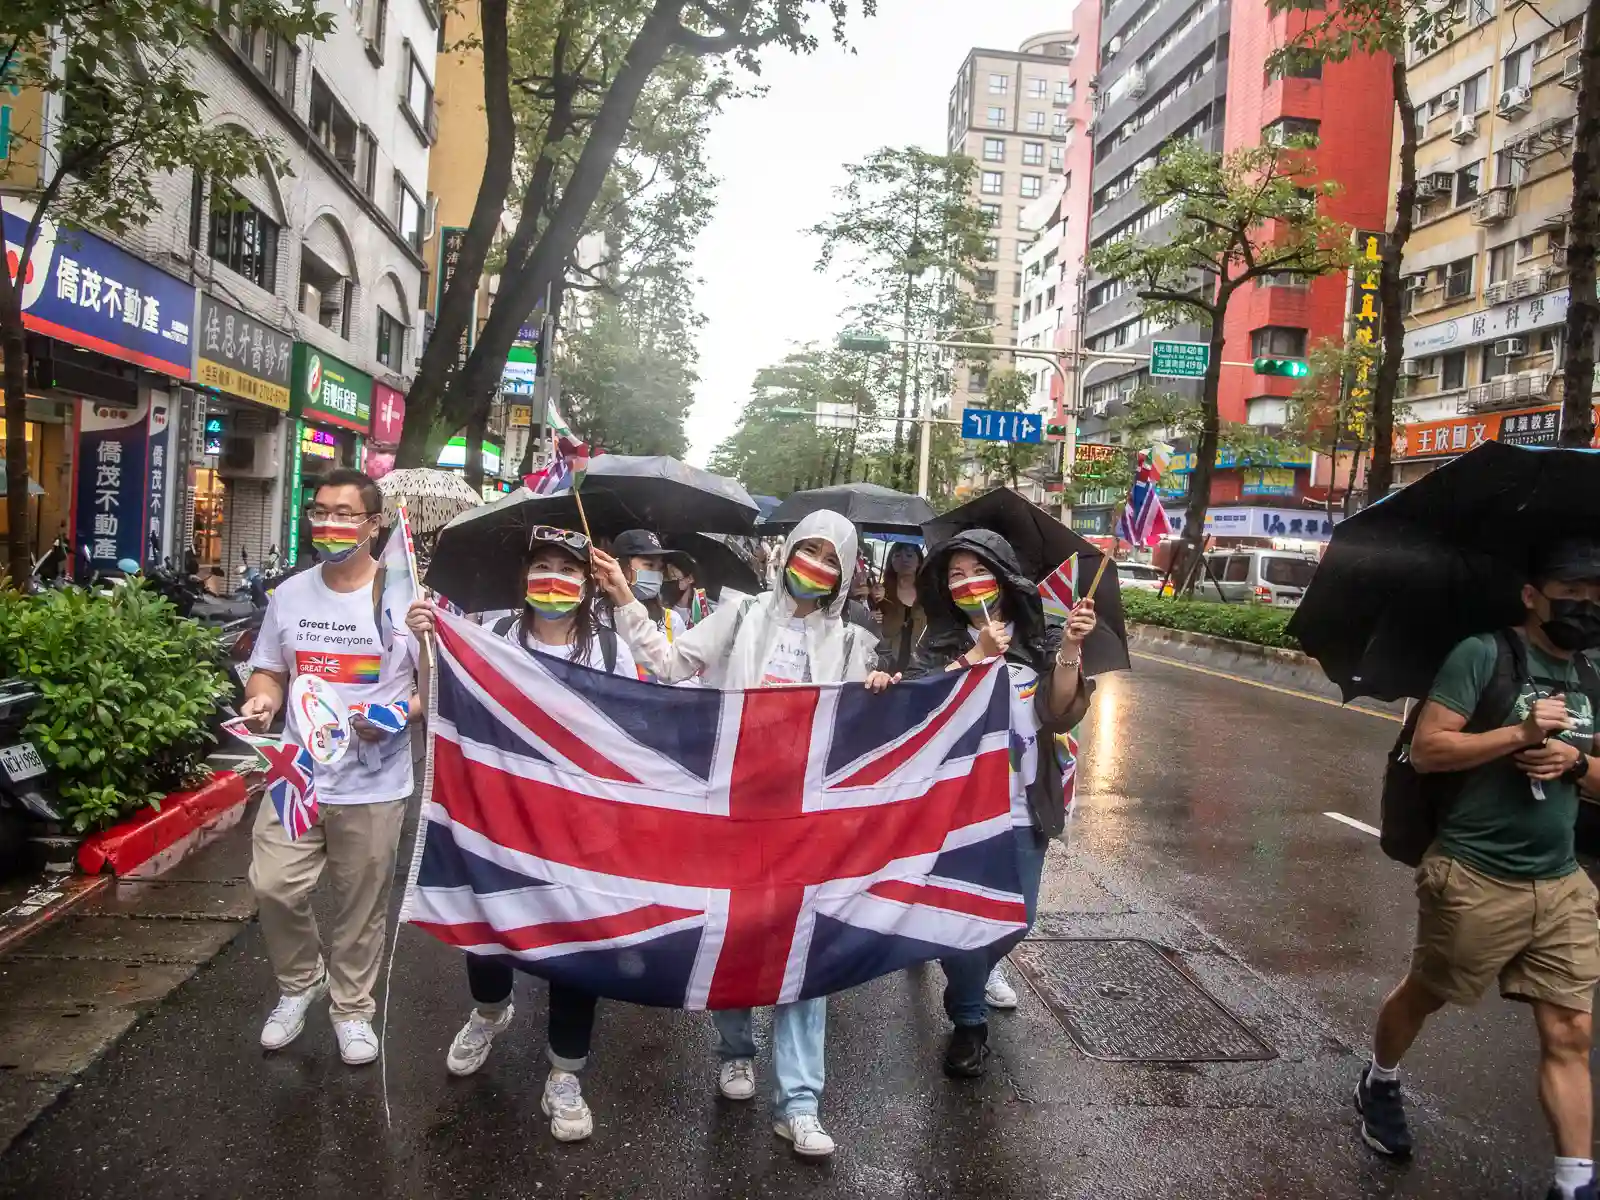 A group of marchers carry the Union Jack.